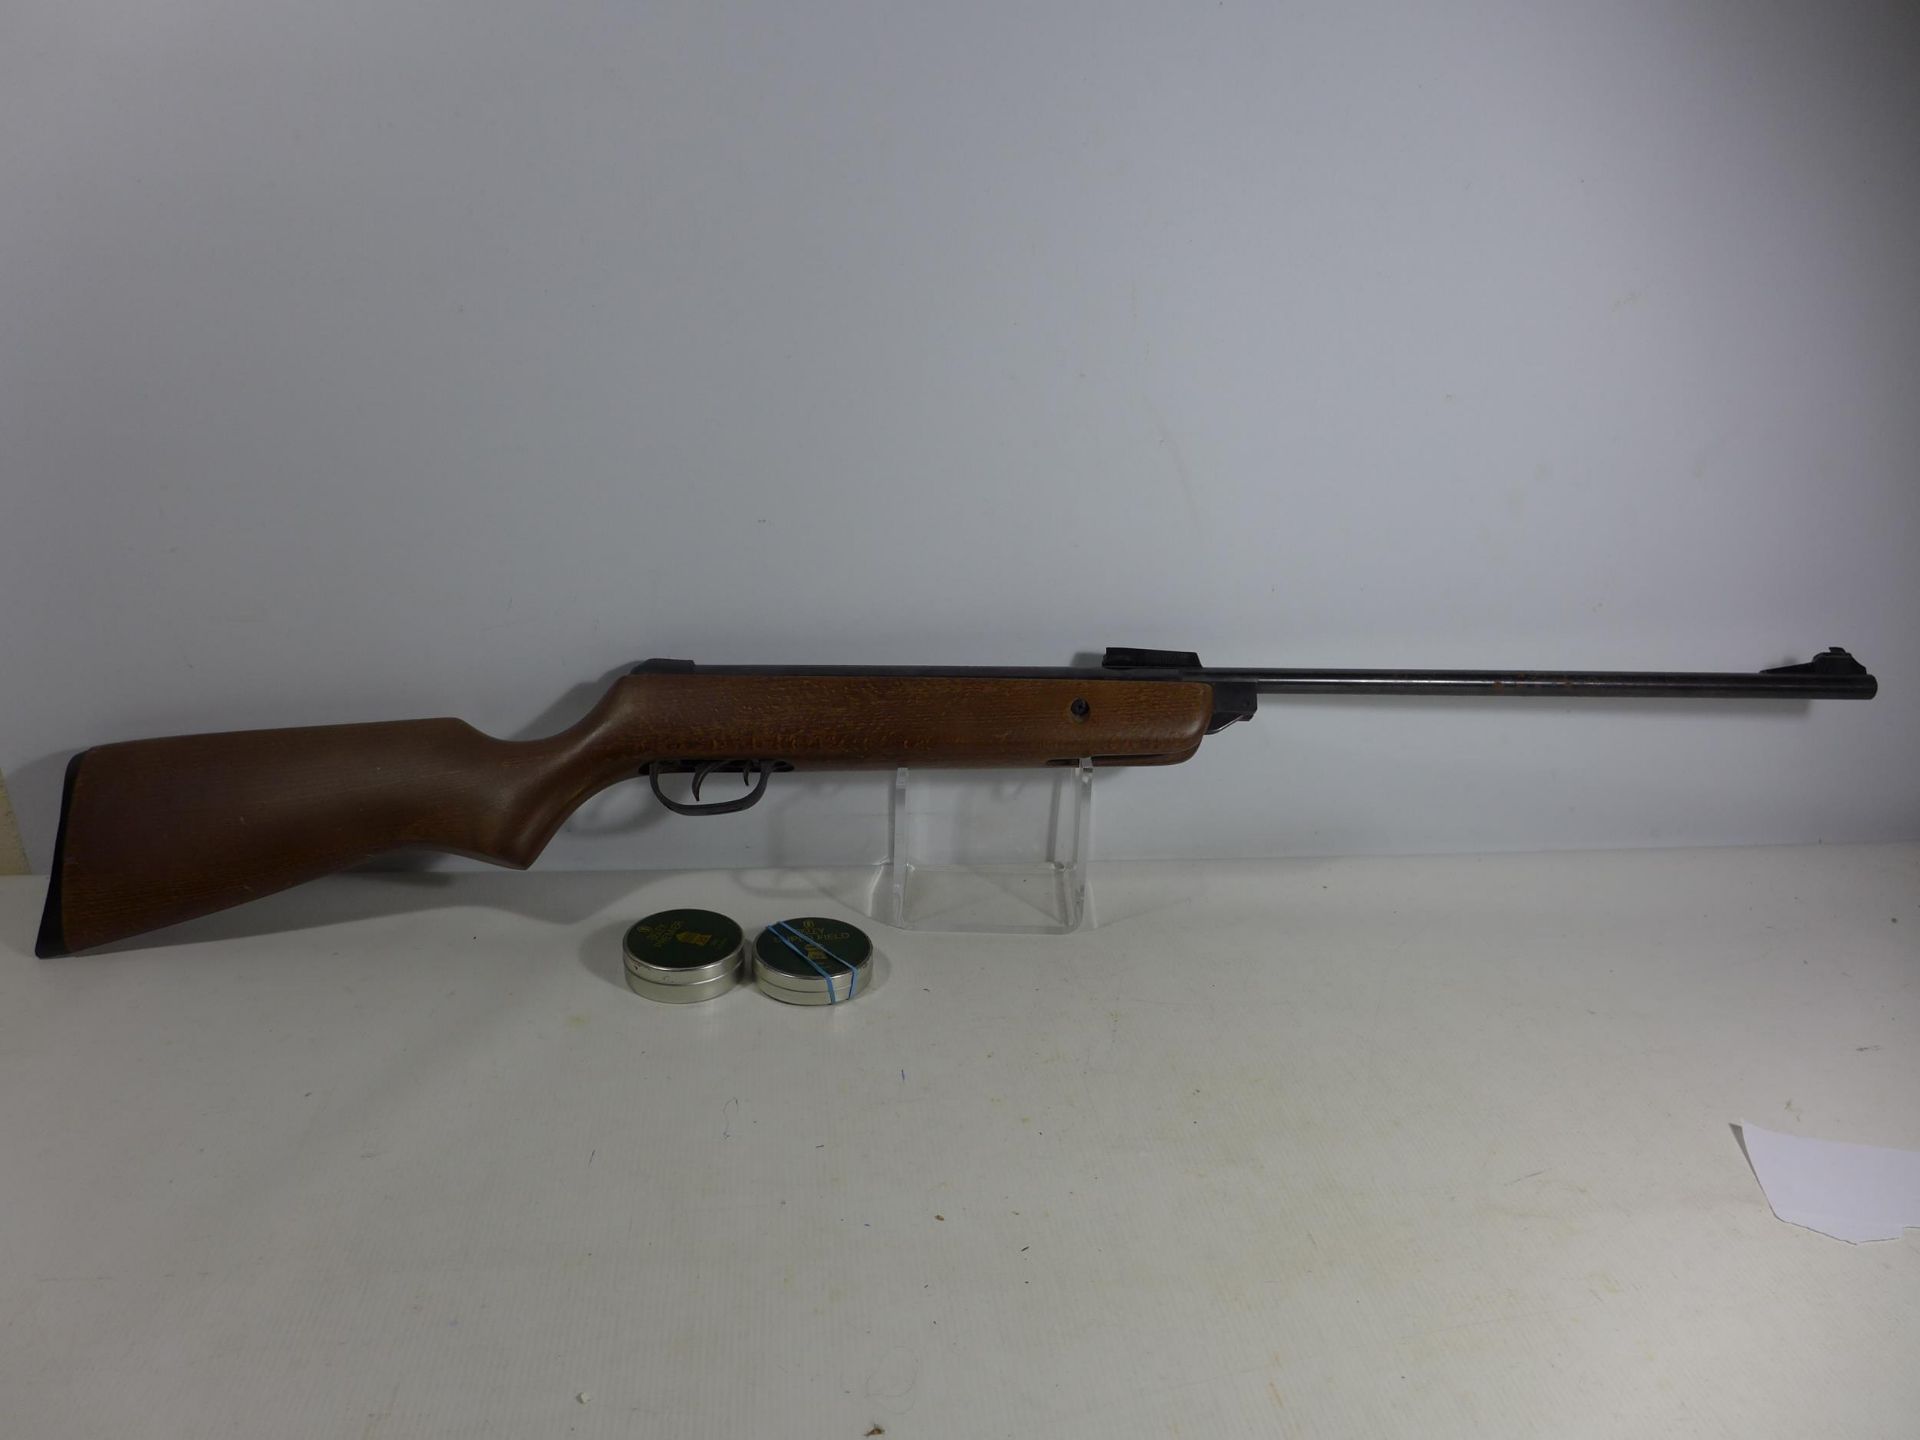 A BSA METEOR .22 CALIBRE AIR RIFLE, 47CM BARREL, SERIAL NUMBER WE16444, LENGTH 106CM, TWO TINS OF